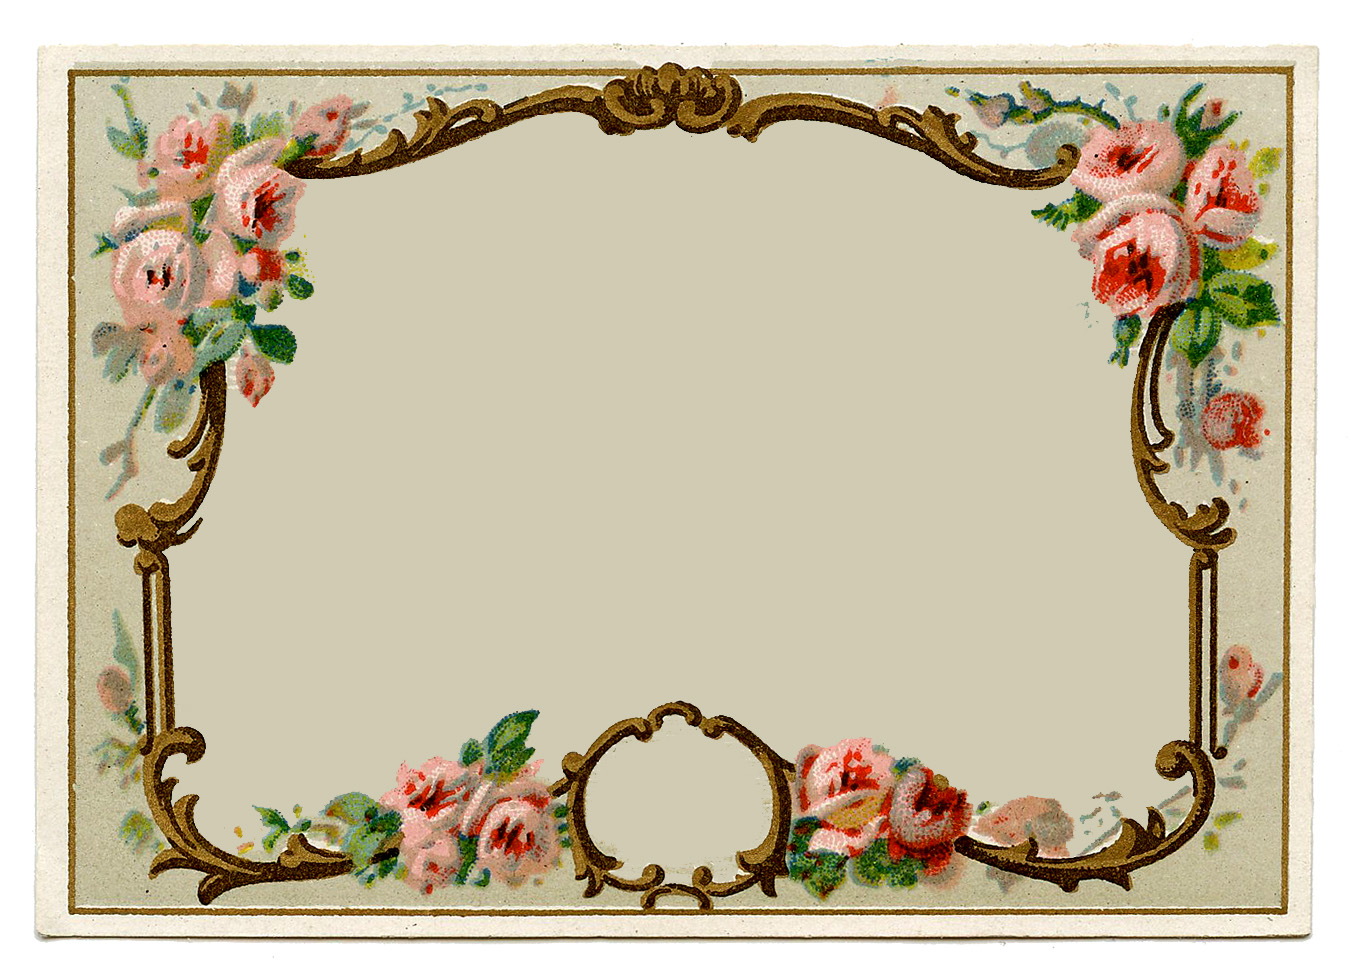 Free Download Vintage Frame Border Clipart Call Victorian Hd Wallpaper